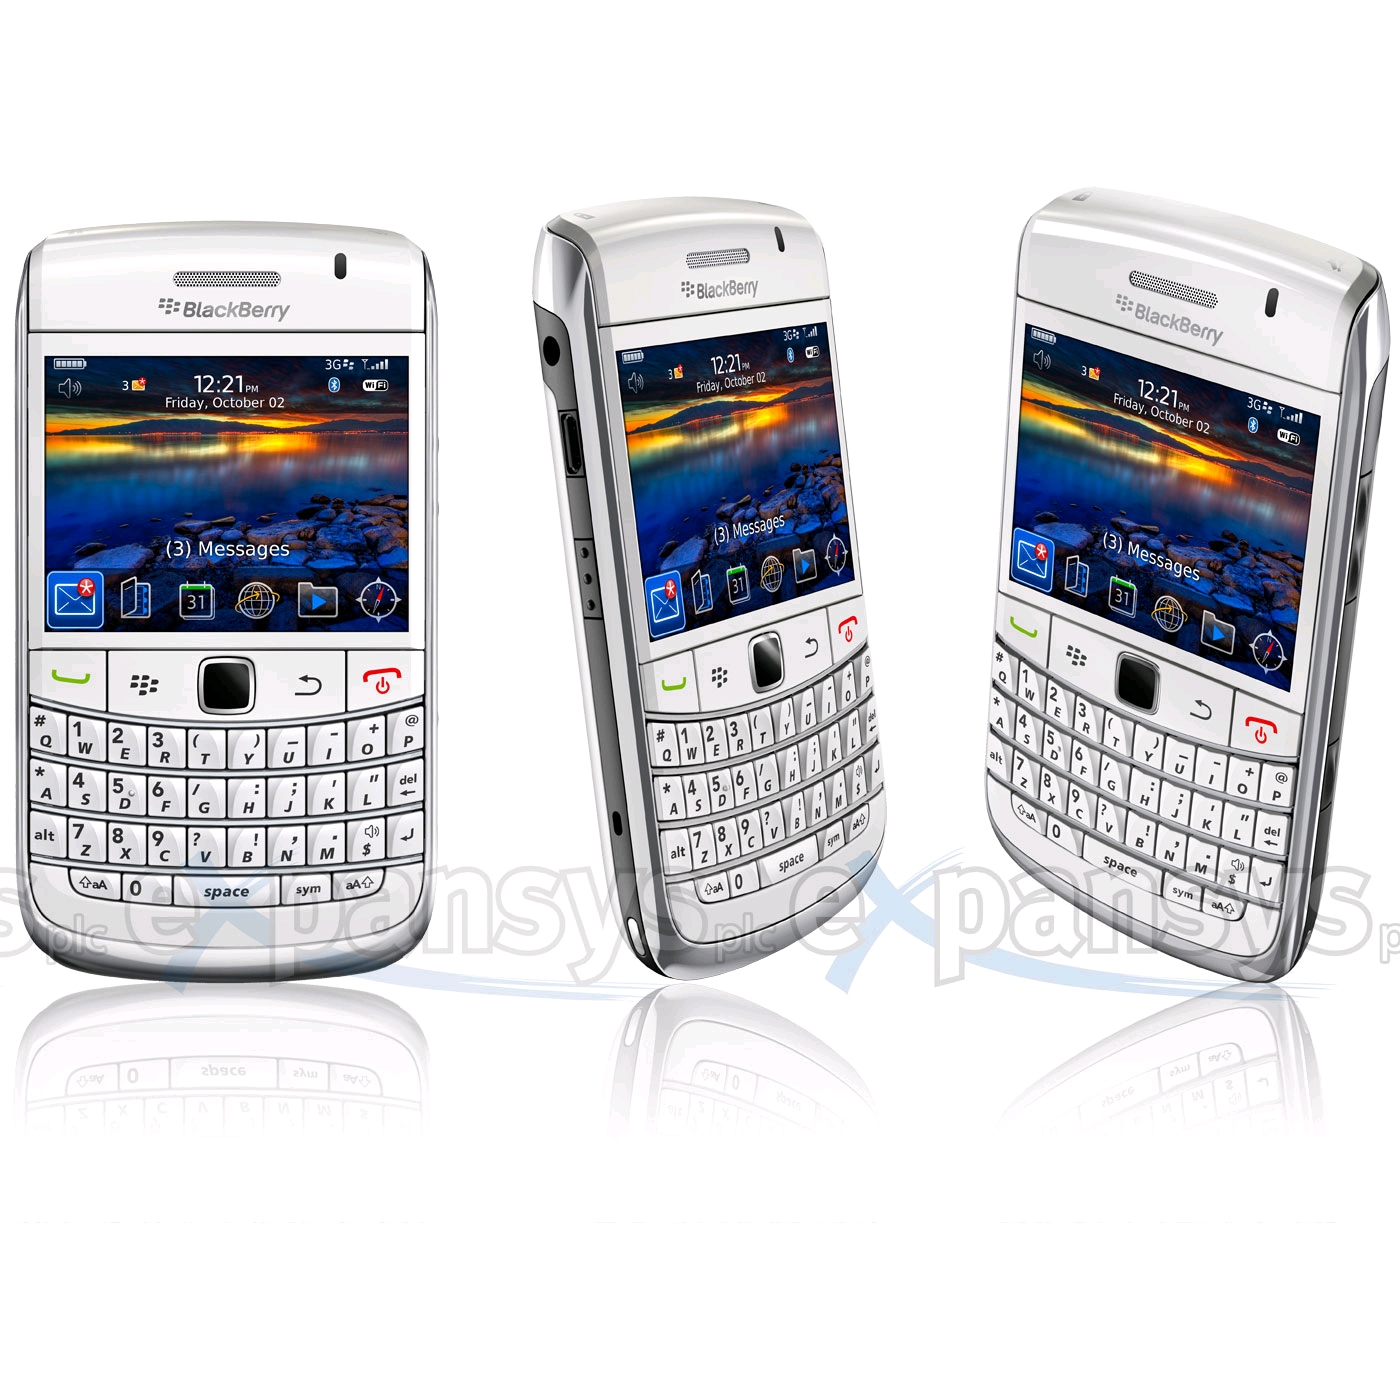 Blackberry Bold 9700 for 10 000 only large image 0